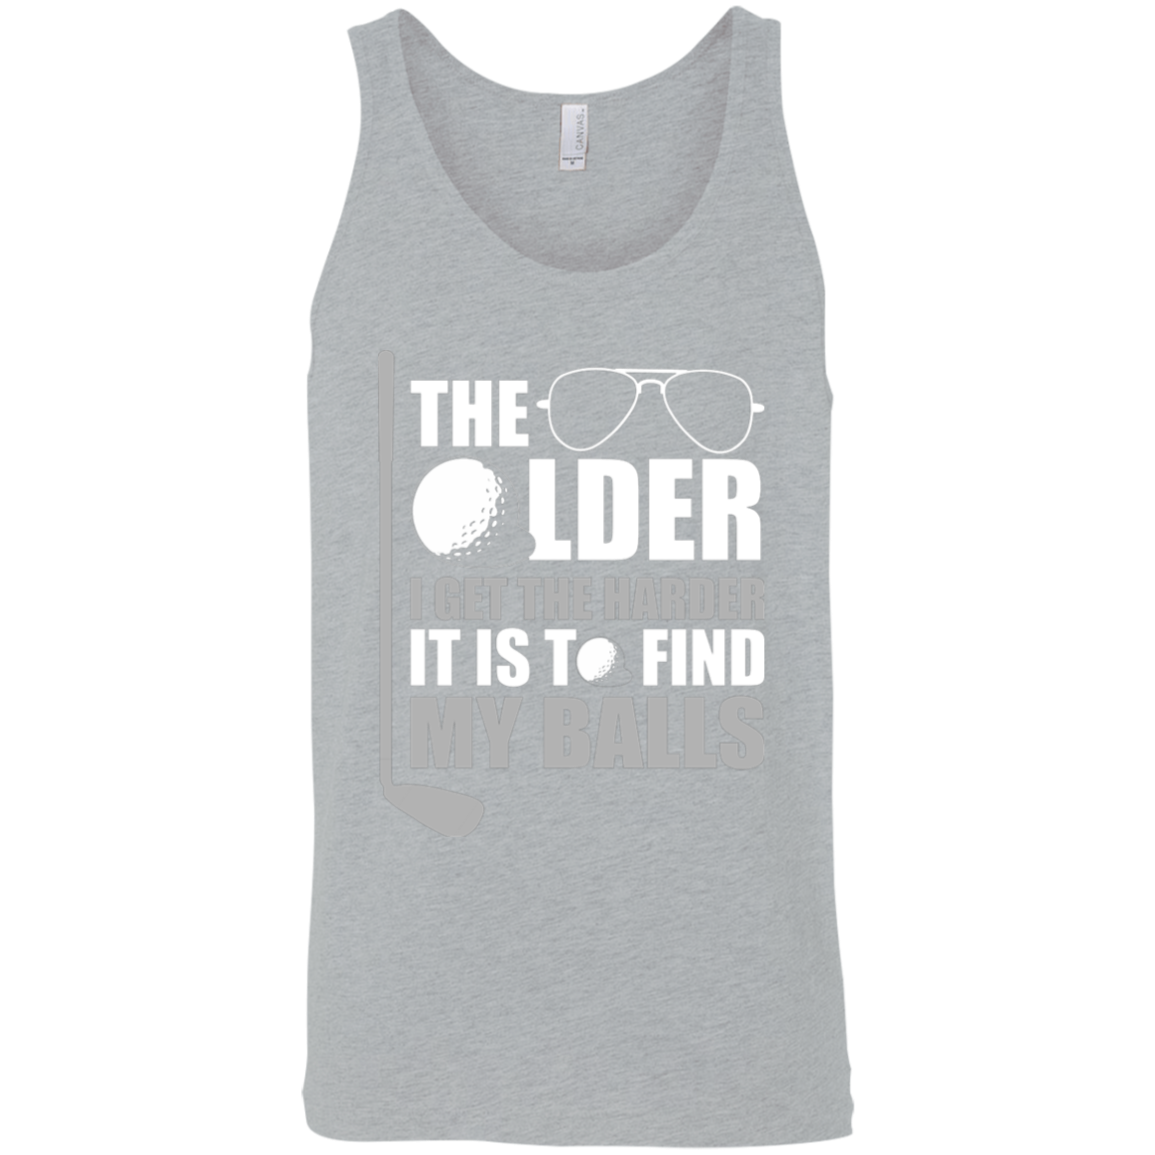 The Older I Get The Harder It Is To Find My Balls Tank Top Apparel - The Beer Lodge